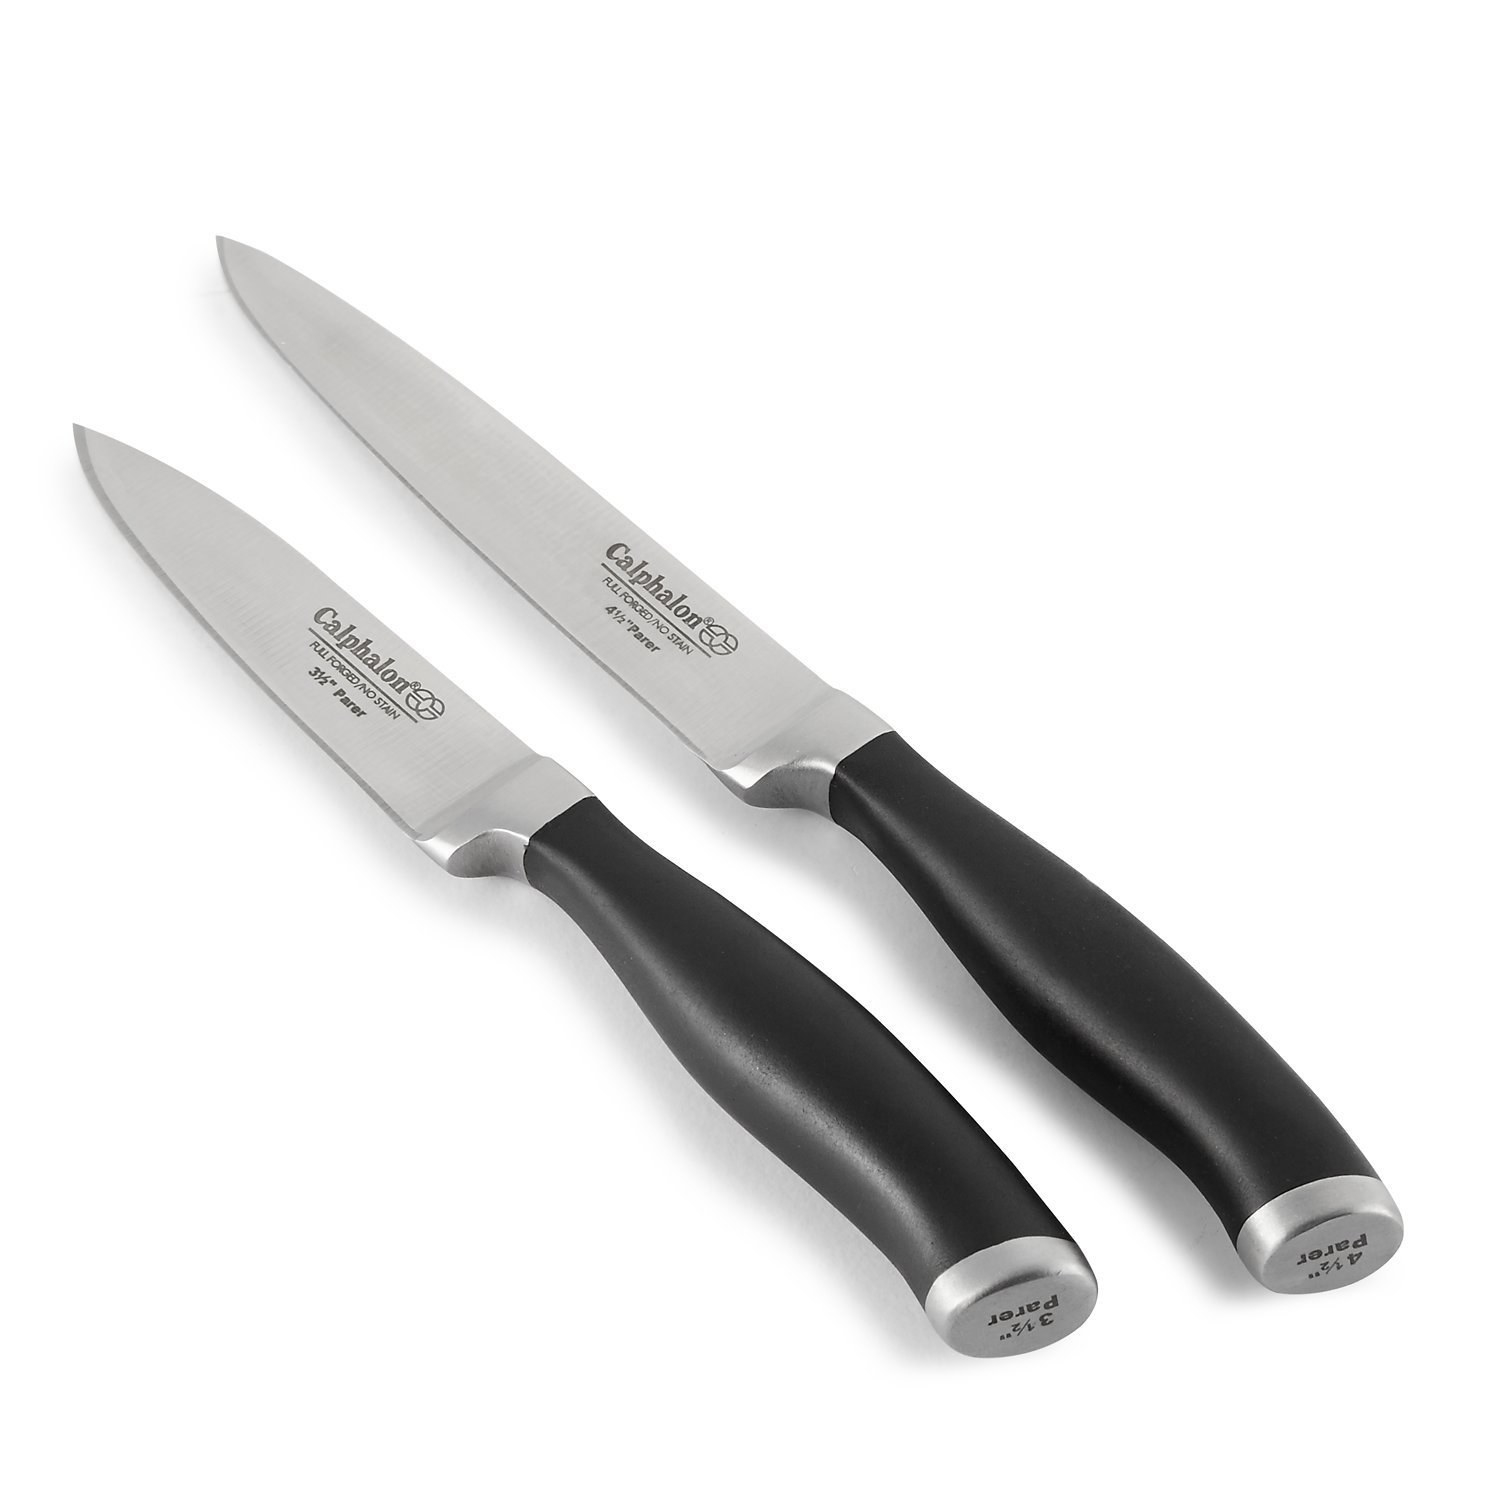 Calphalon knife sets on sale for up to 53% off on